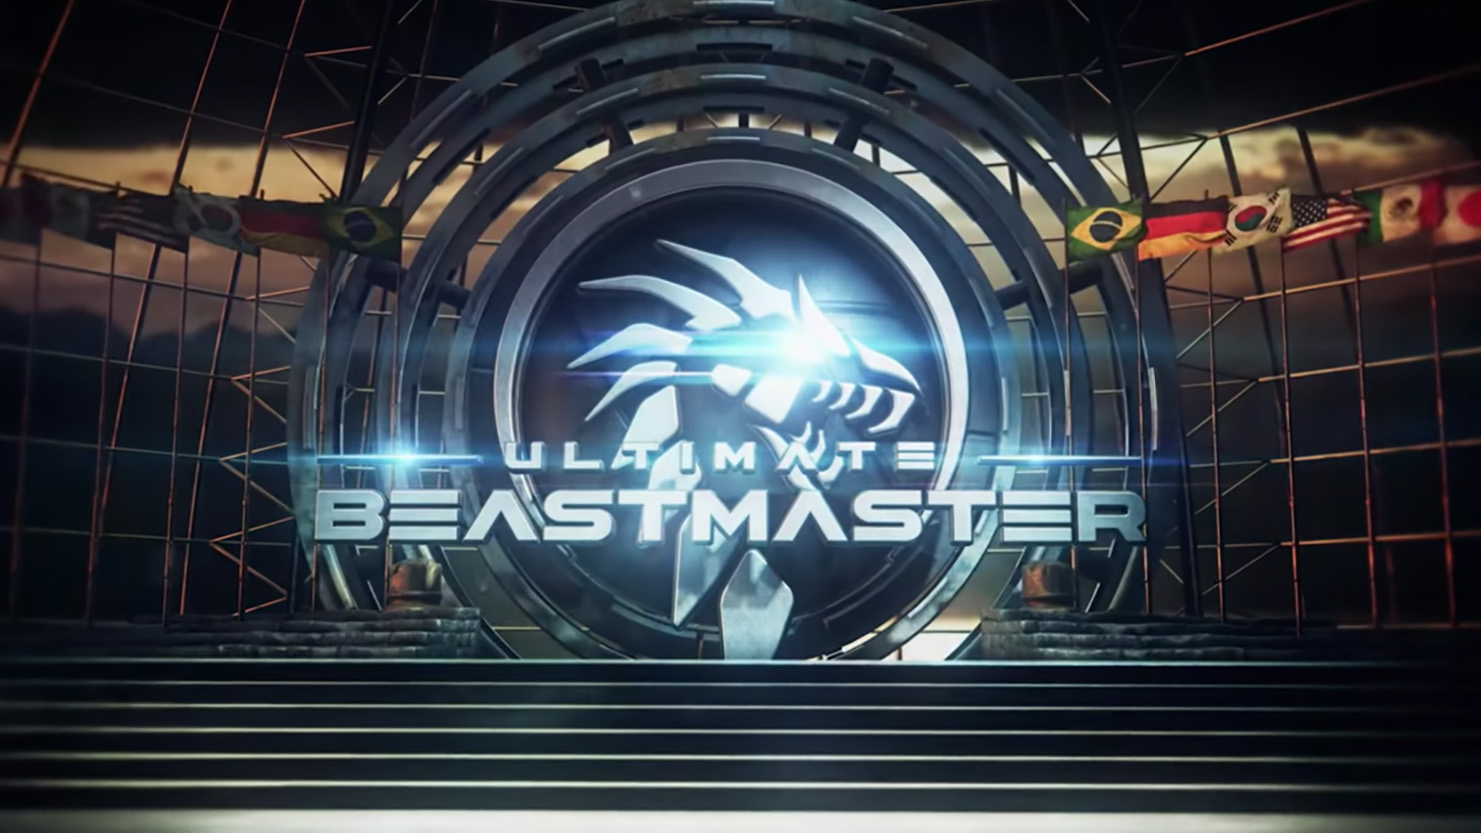 The Subtle Sexism of Ultimate Beastmaster